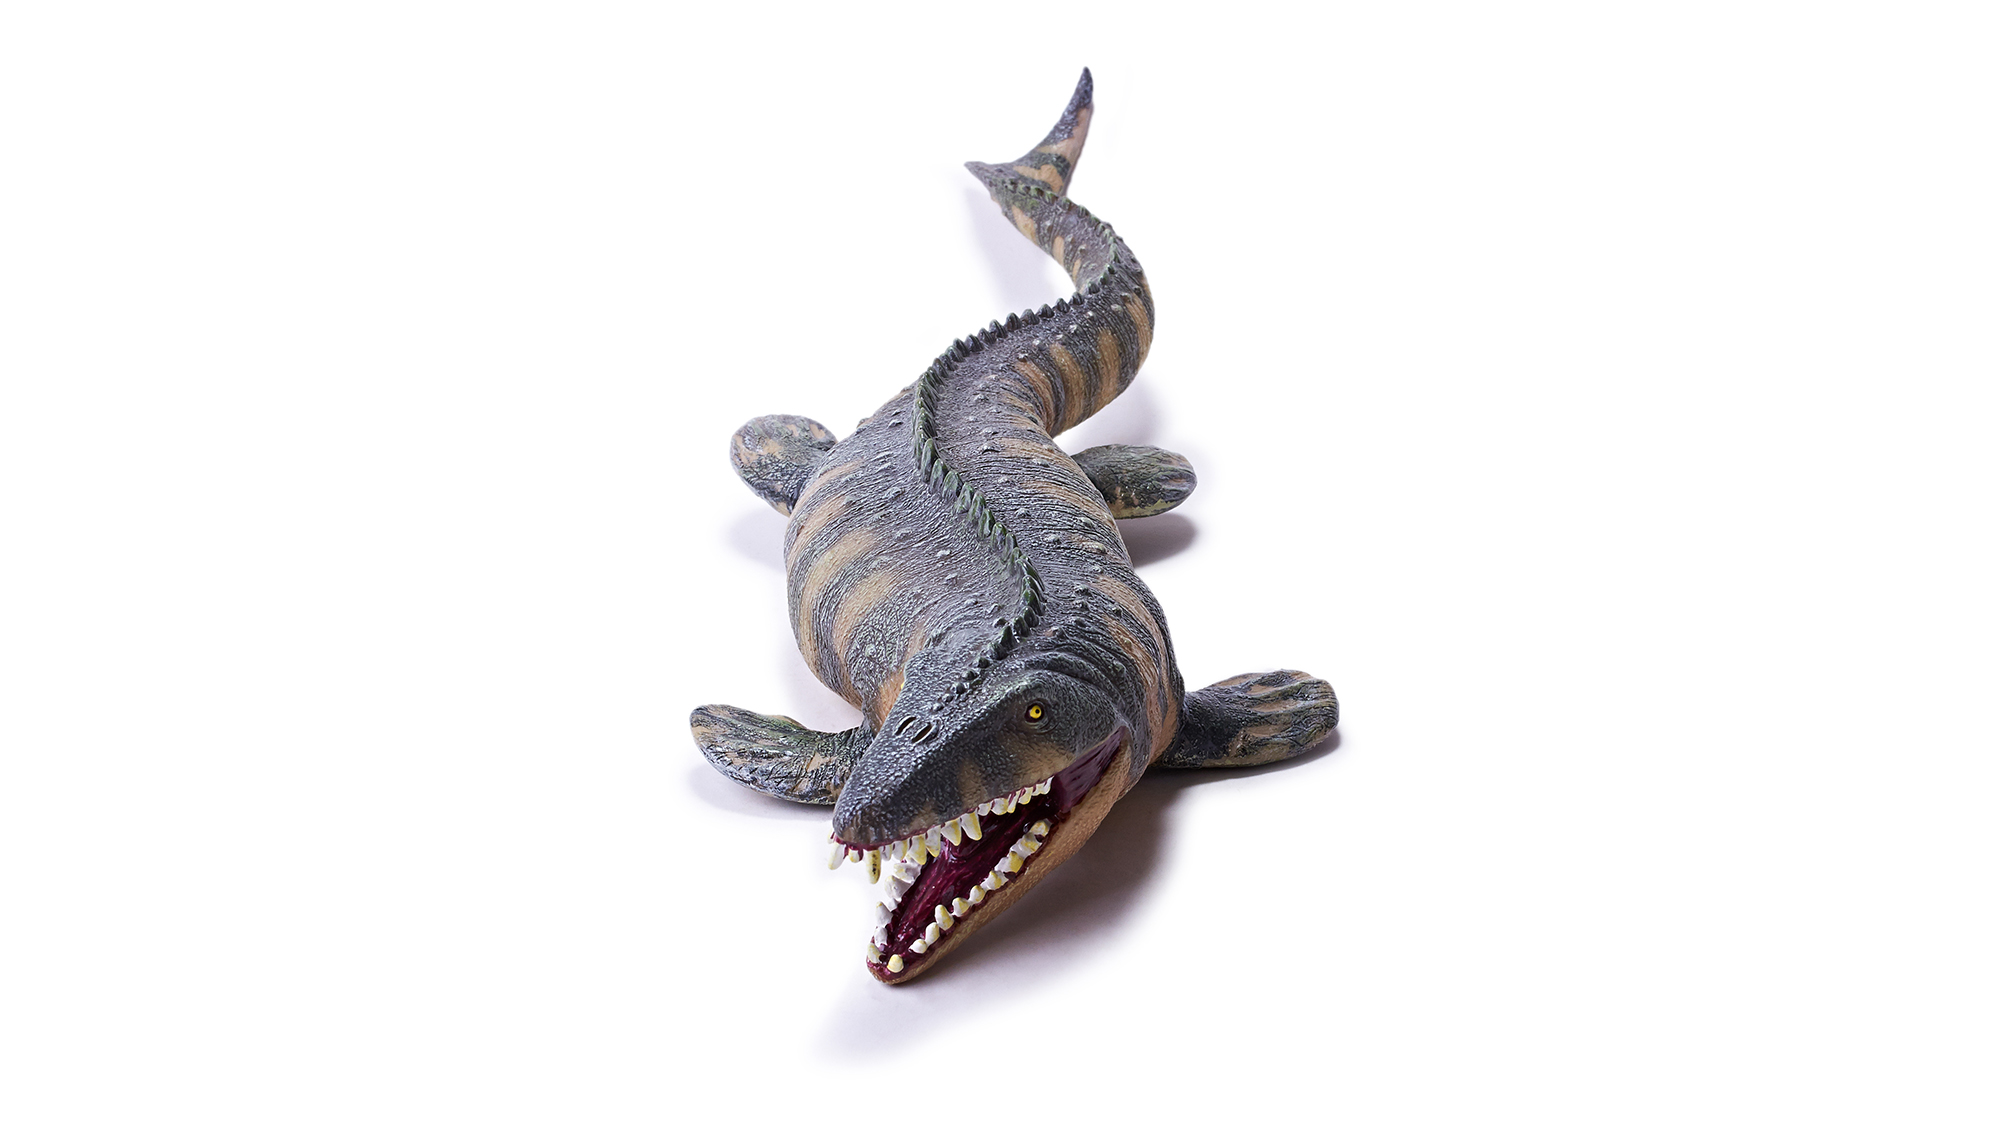 Childrens dinosaurs toys Mosasaurus toy model